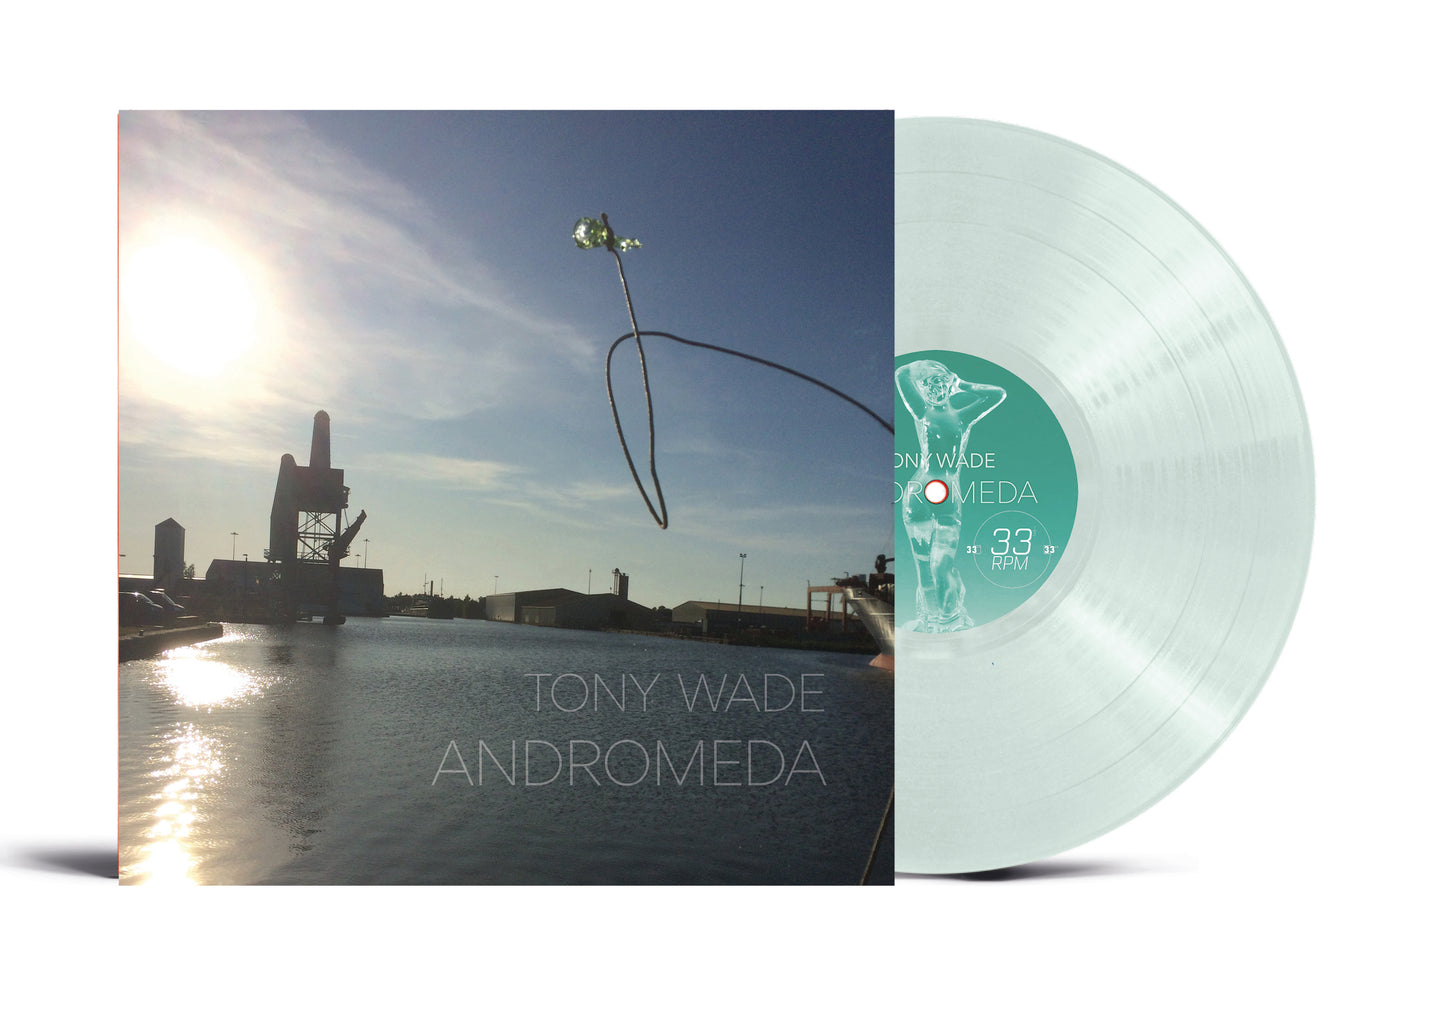 Andromeda - The Vinyl Limited Edition